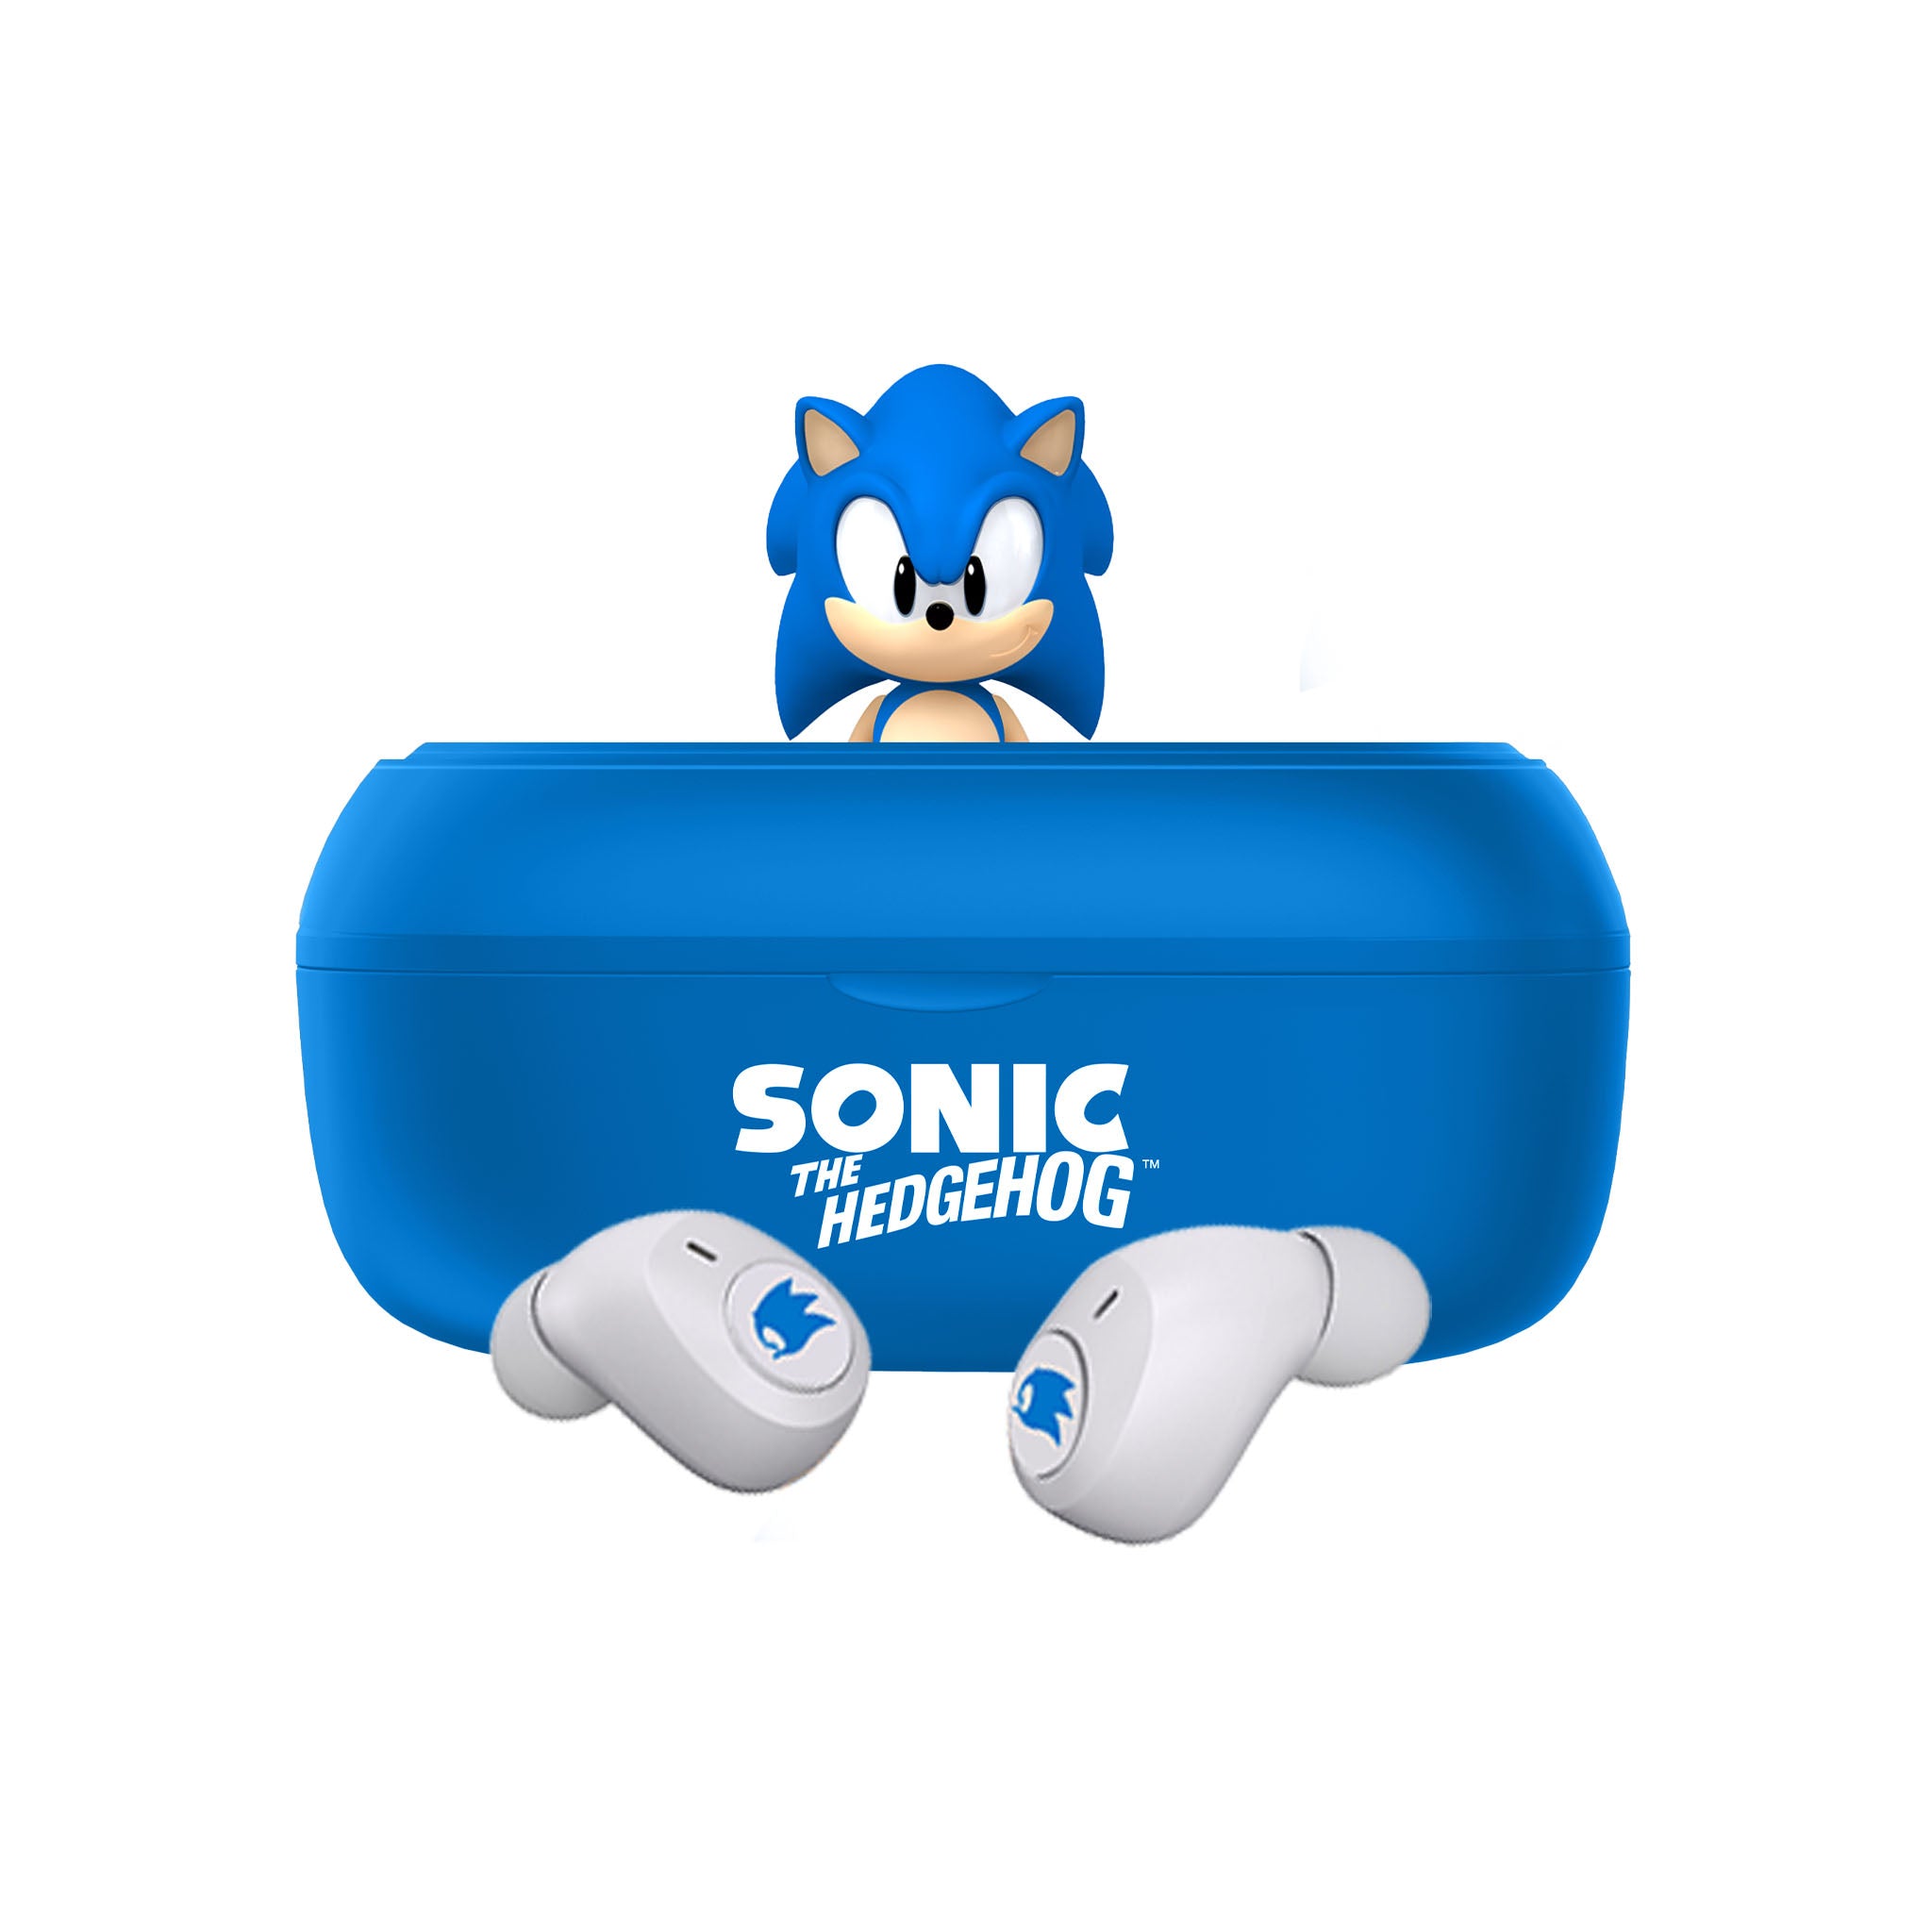 Sonic the Hedgehog 3D Character collectable TWS Earphones -Blue